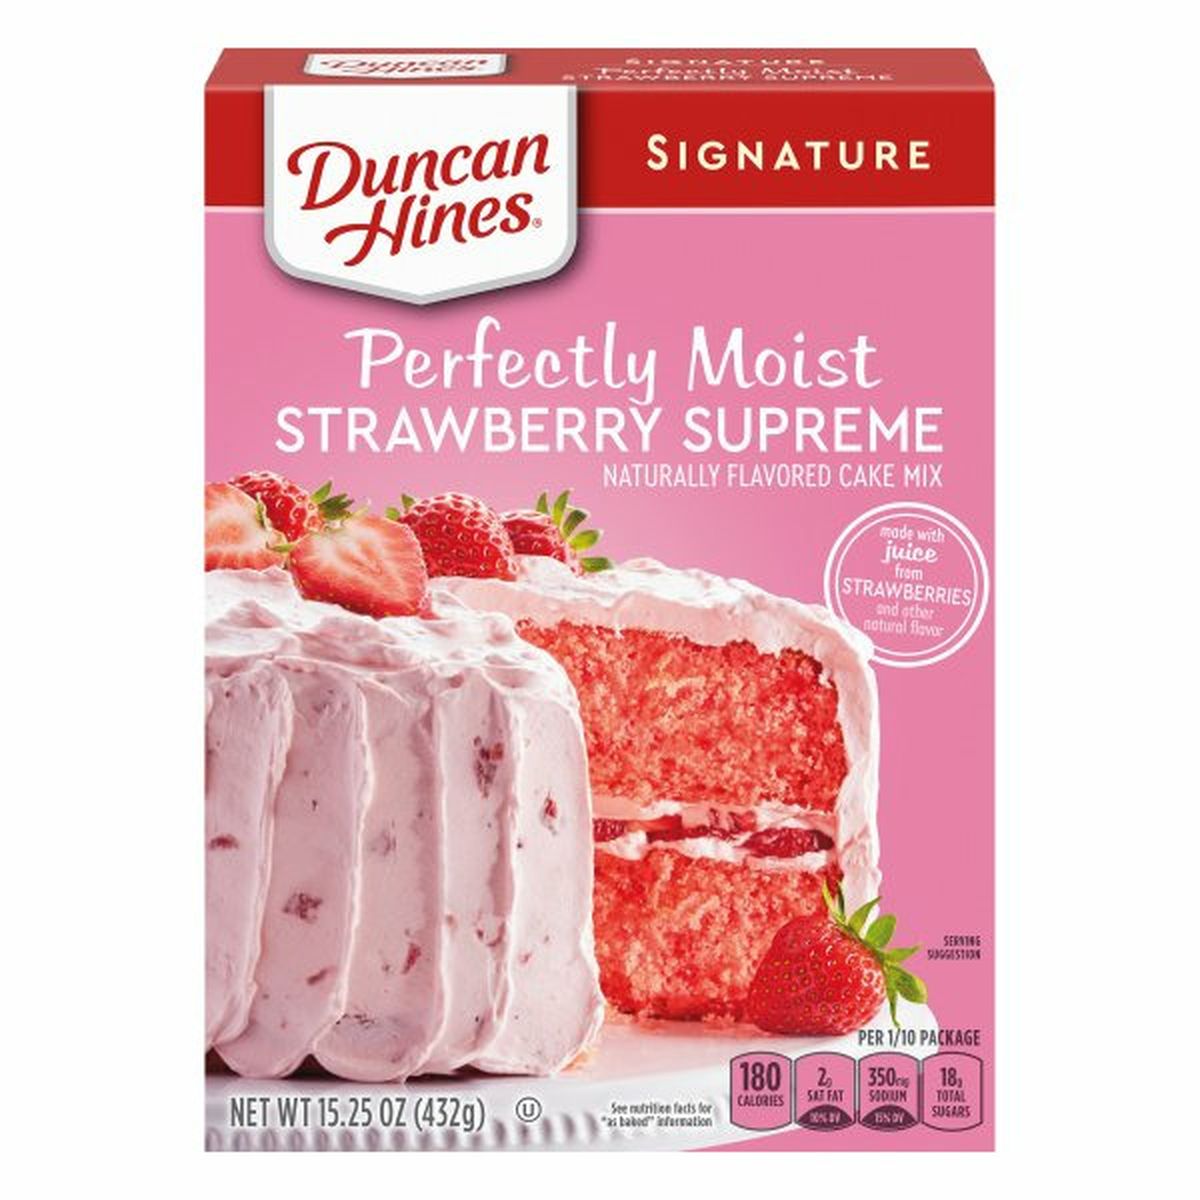 Calories in Duncan Hines Signature Cake Mix, Strawberry Supreme, Perfectly Moist